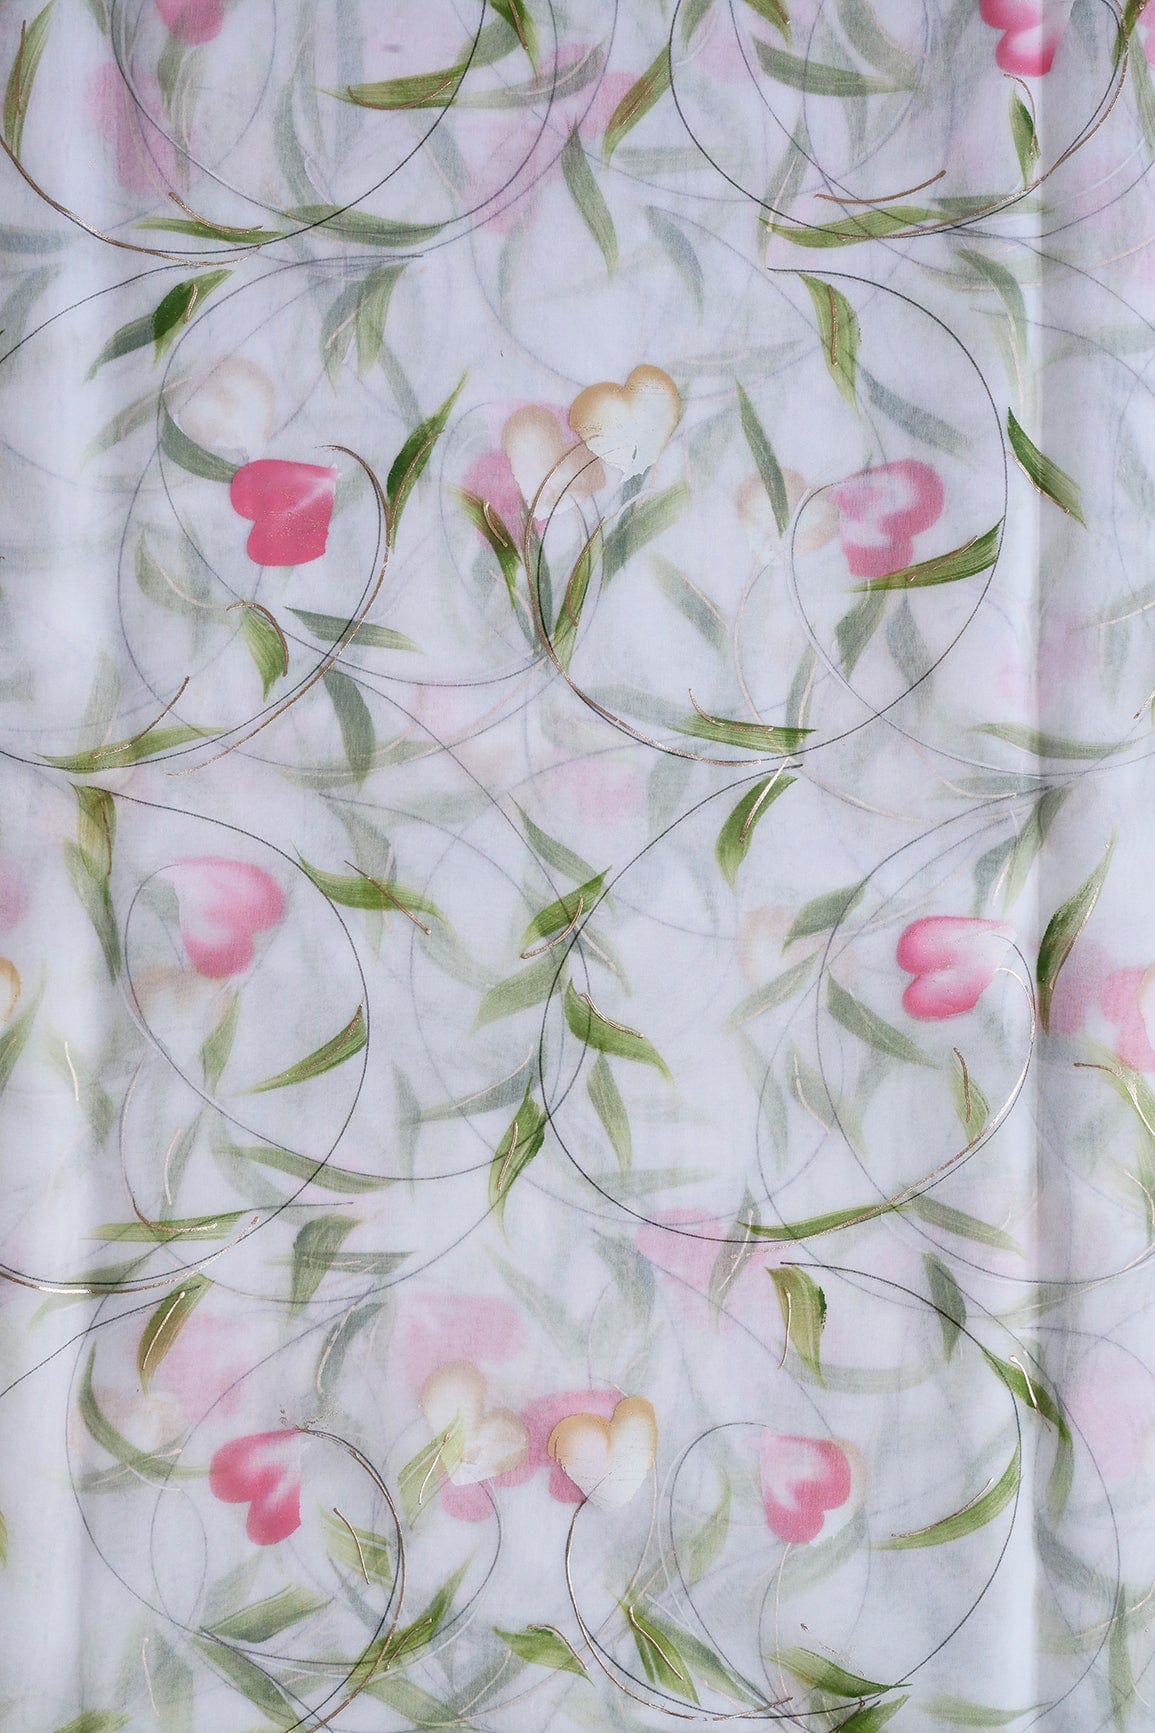 doeraa Embroidery Fabrics Beautiful Floral Hand Painted With Foil Work On White Organza Fabric